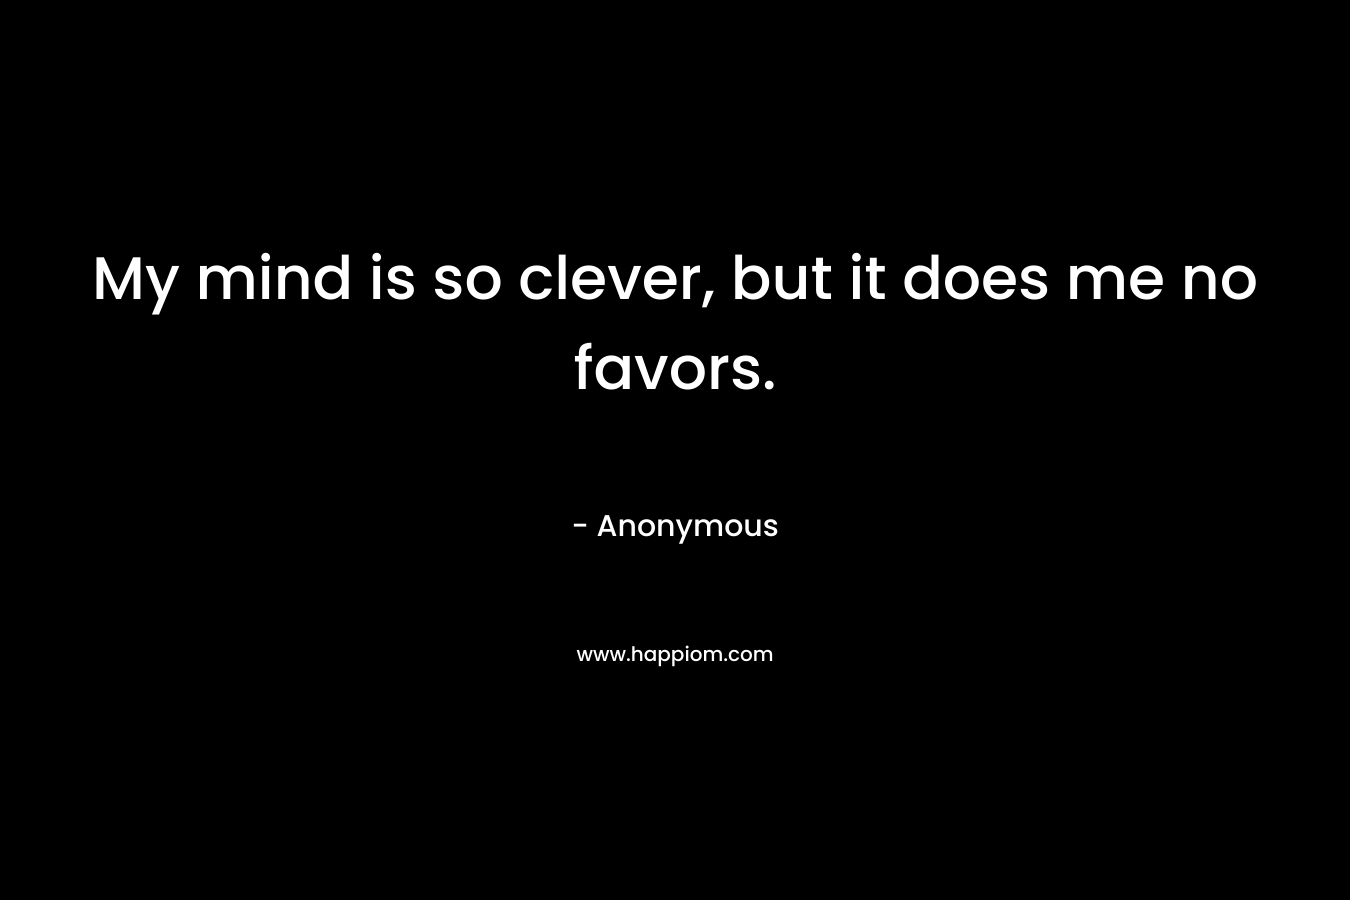 My mind is so clever, but it does me no favors. – Anonymous